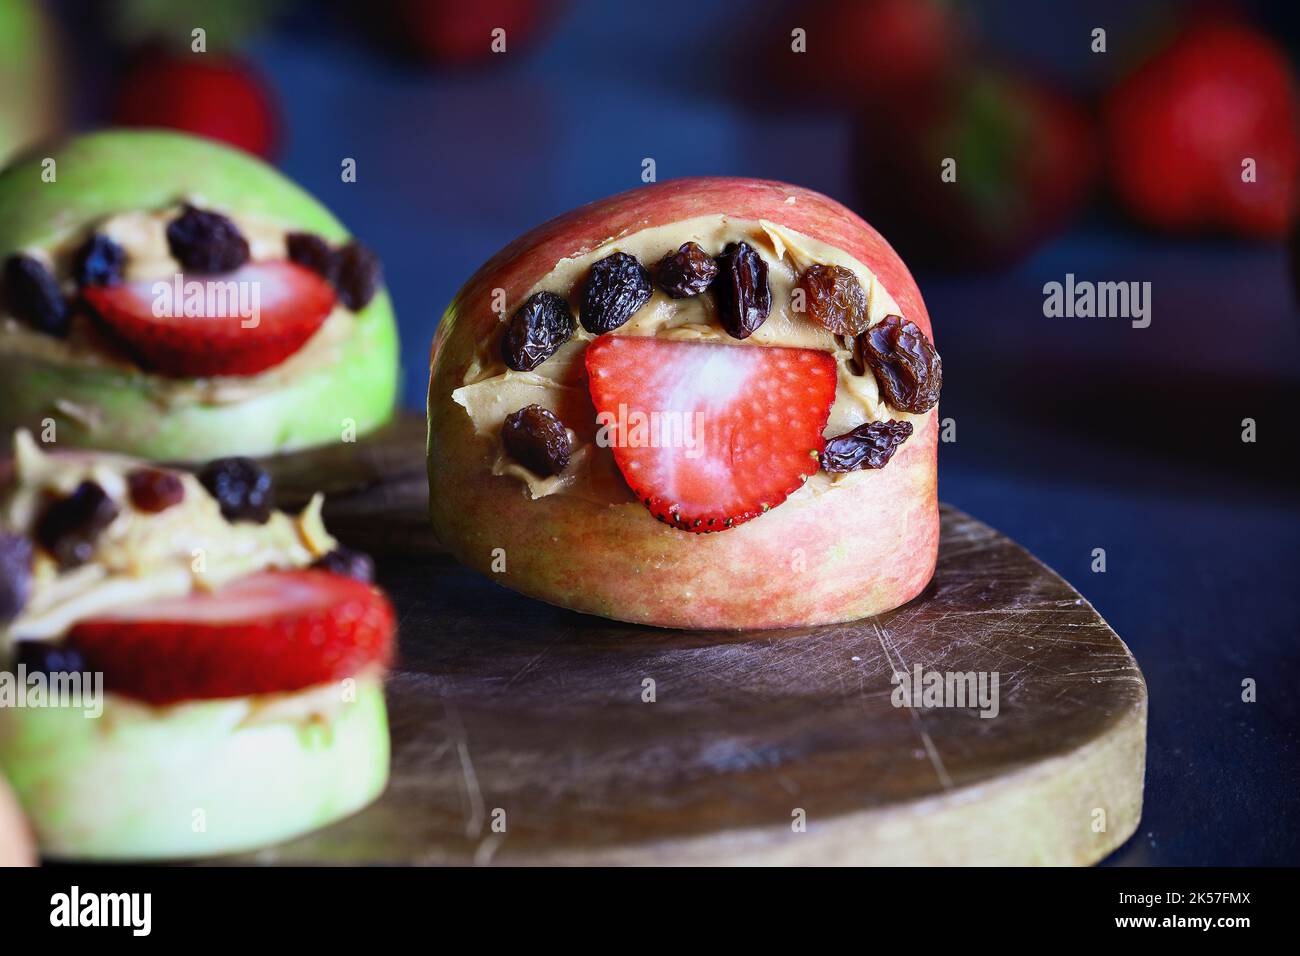 Apple monster mouths open wide with strawberry tongues and raisin teeth. Filled with peanut butter. Selective focus with blurred background. Stock Photo